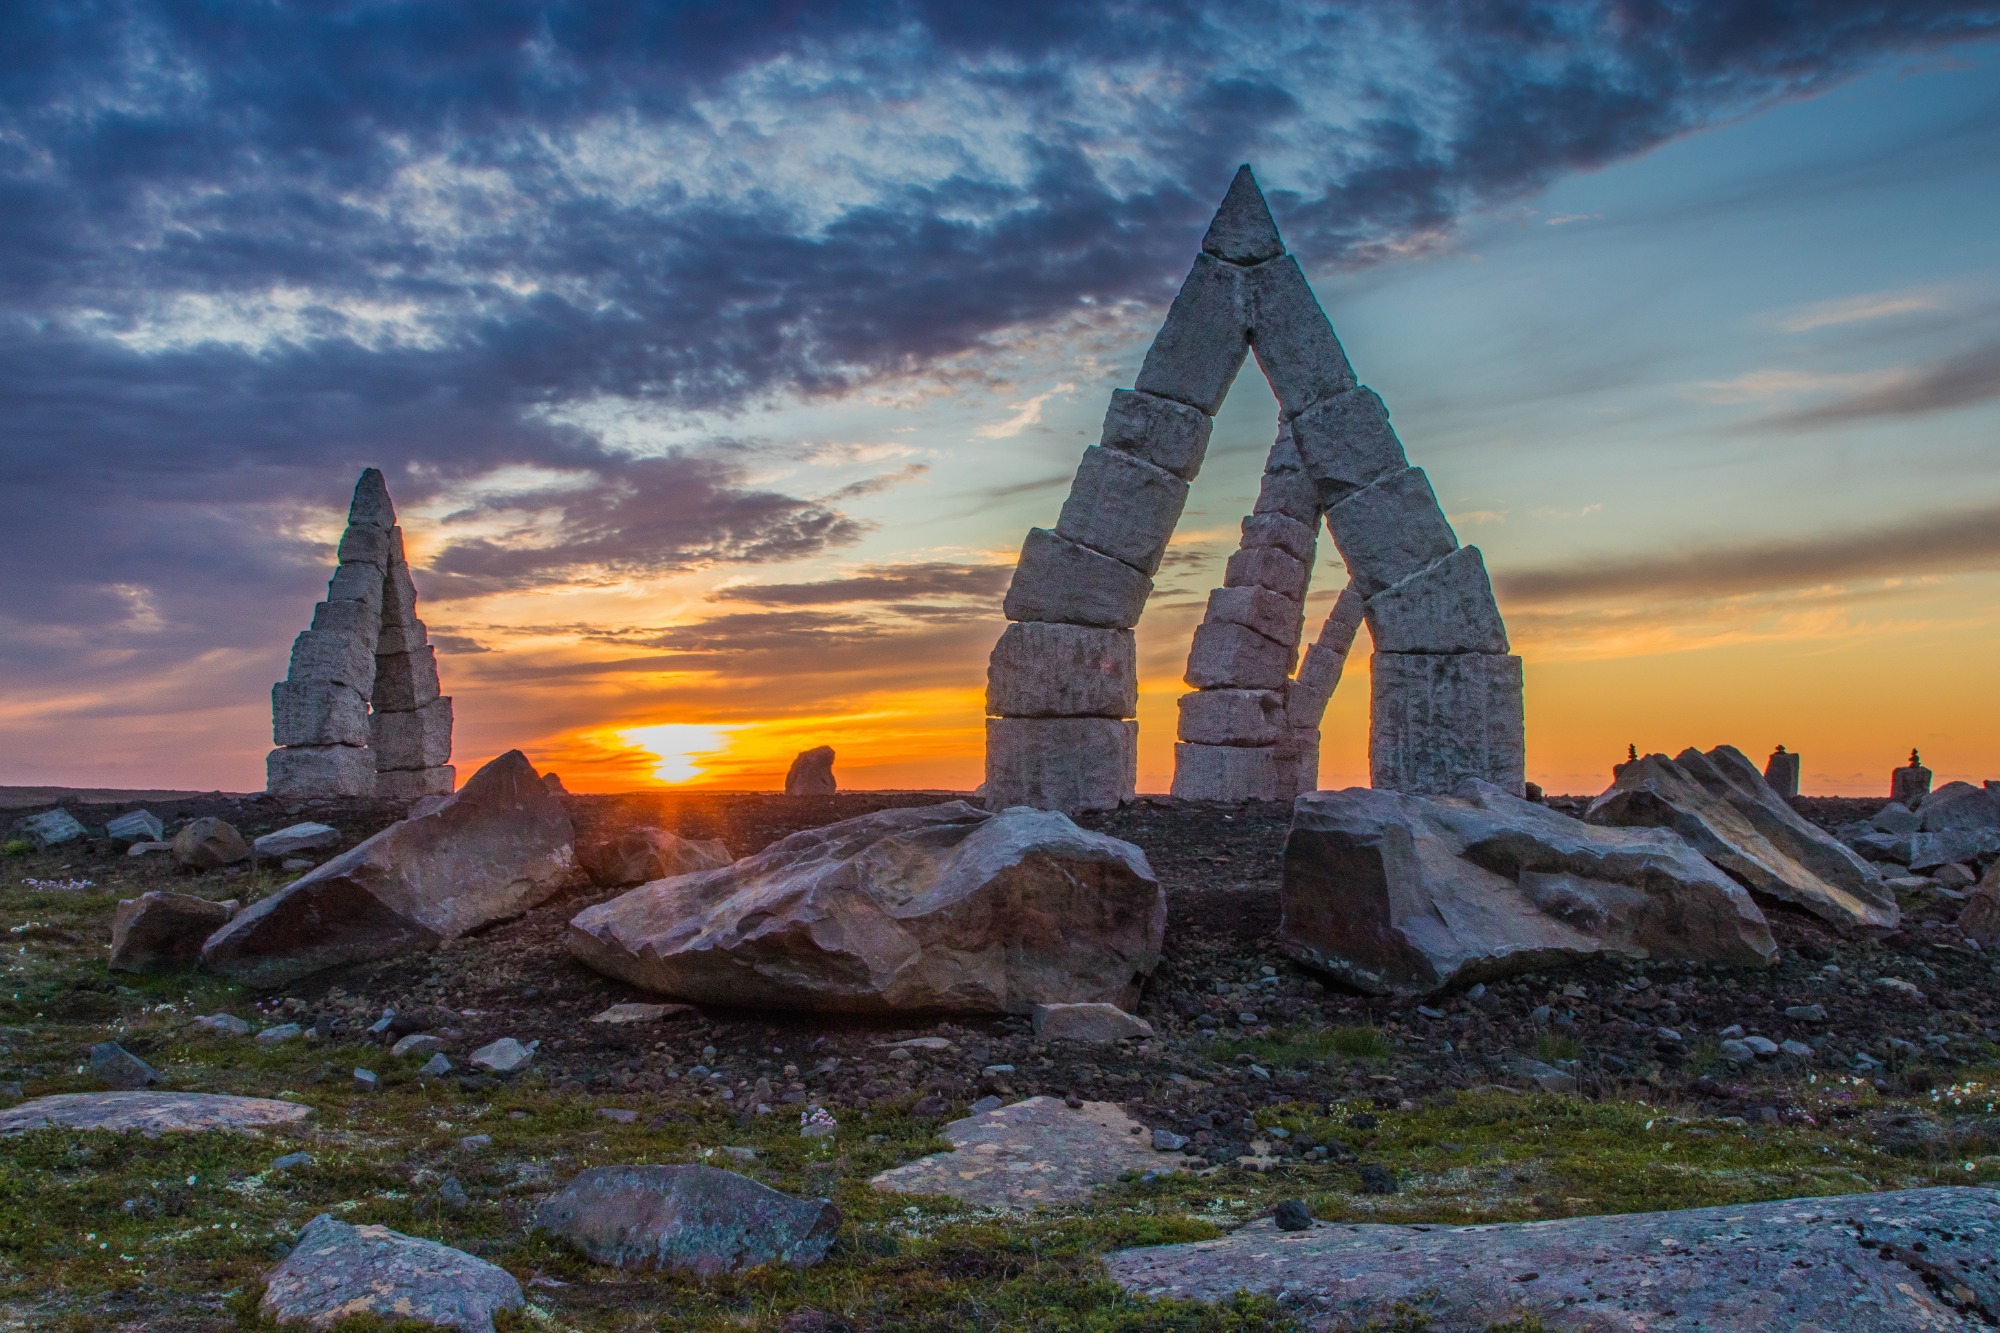 The Arctic Henge sculpture located in North Iceland